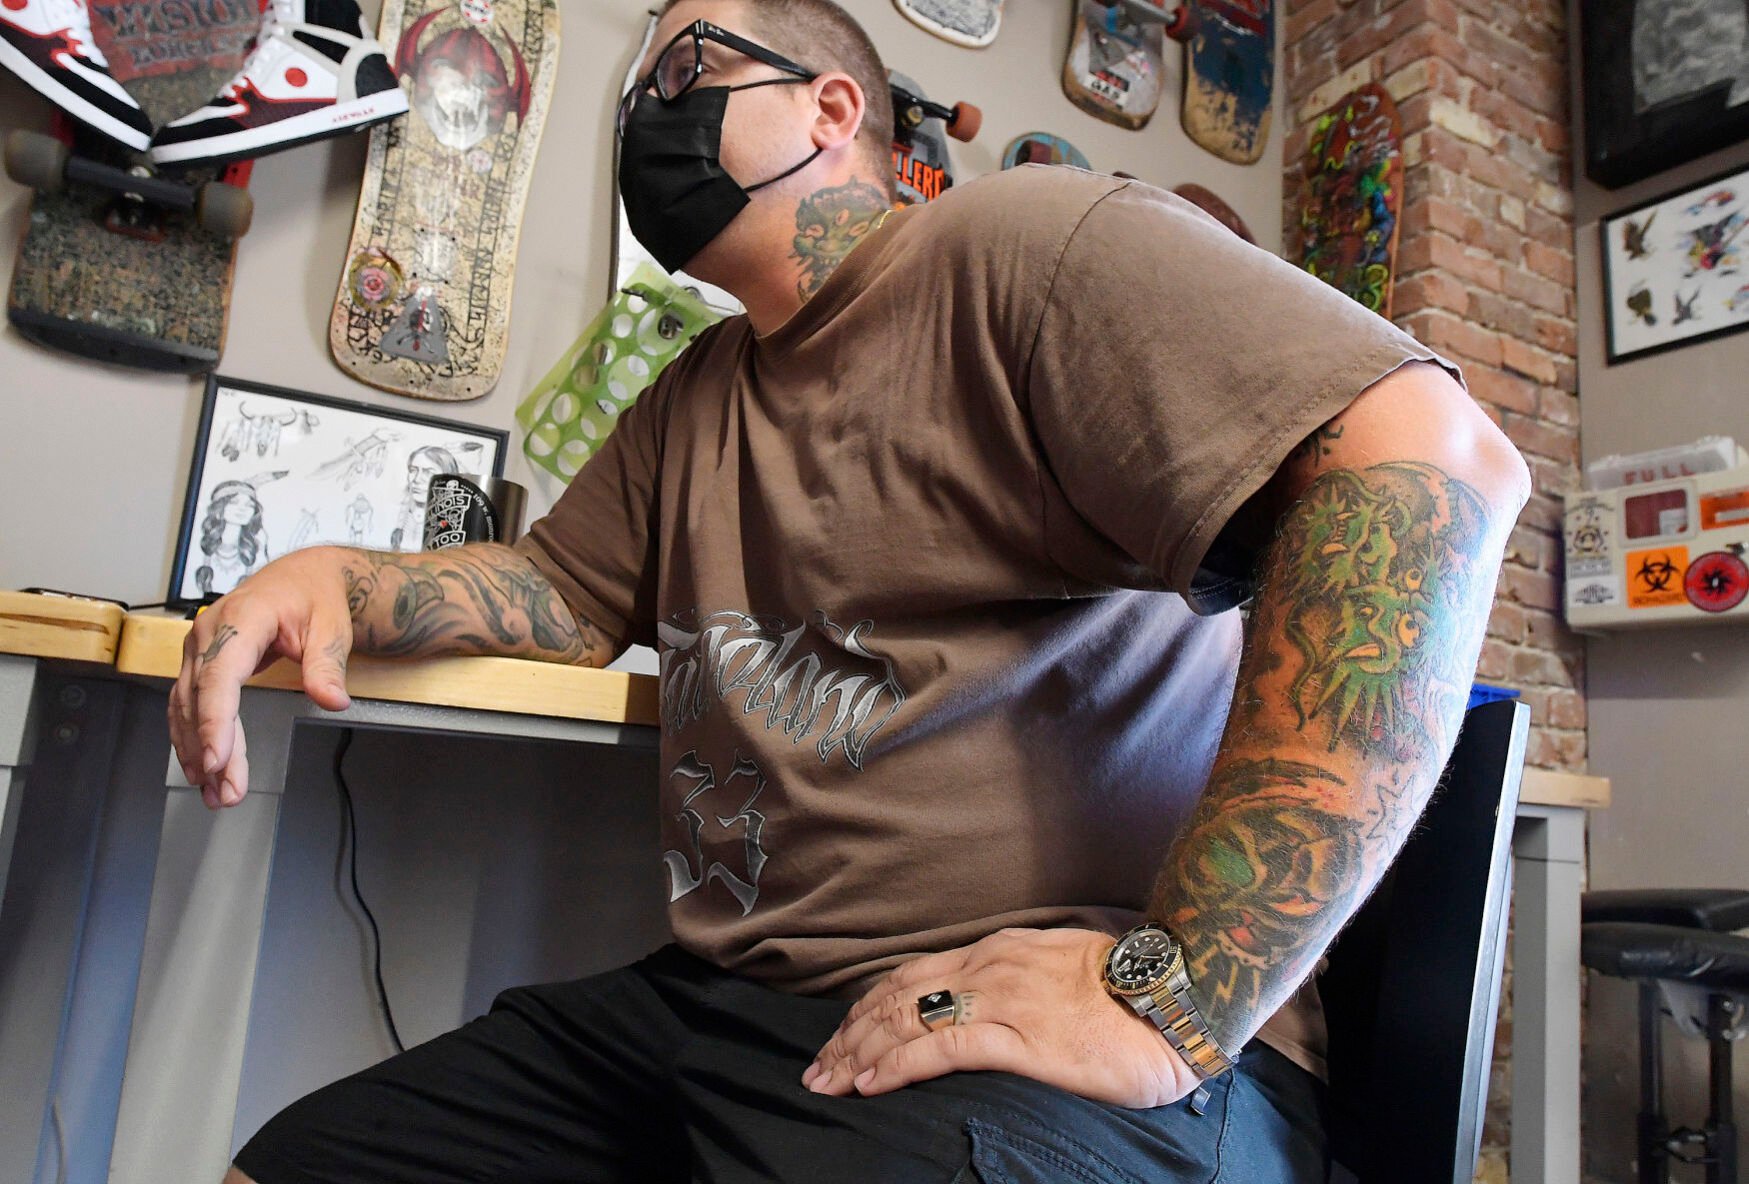 Justin Warn of Anaheims Torch Tattoo on Smooth Tattoos and Working with  his Friends  OC Weekly